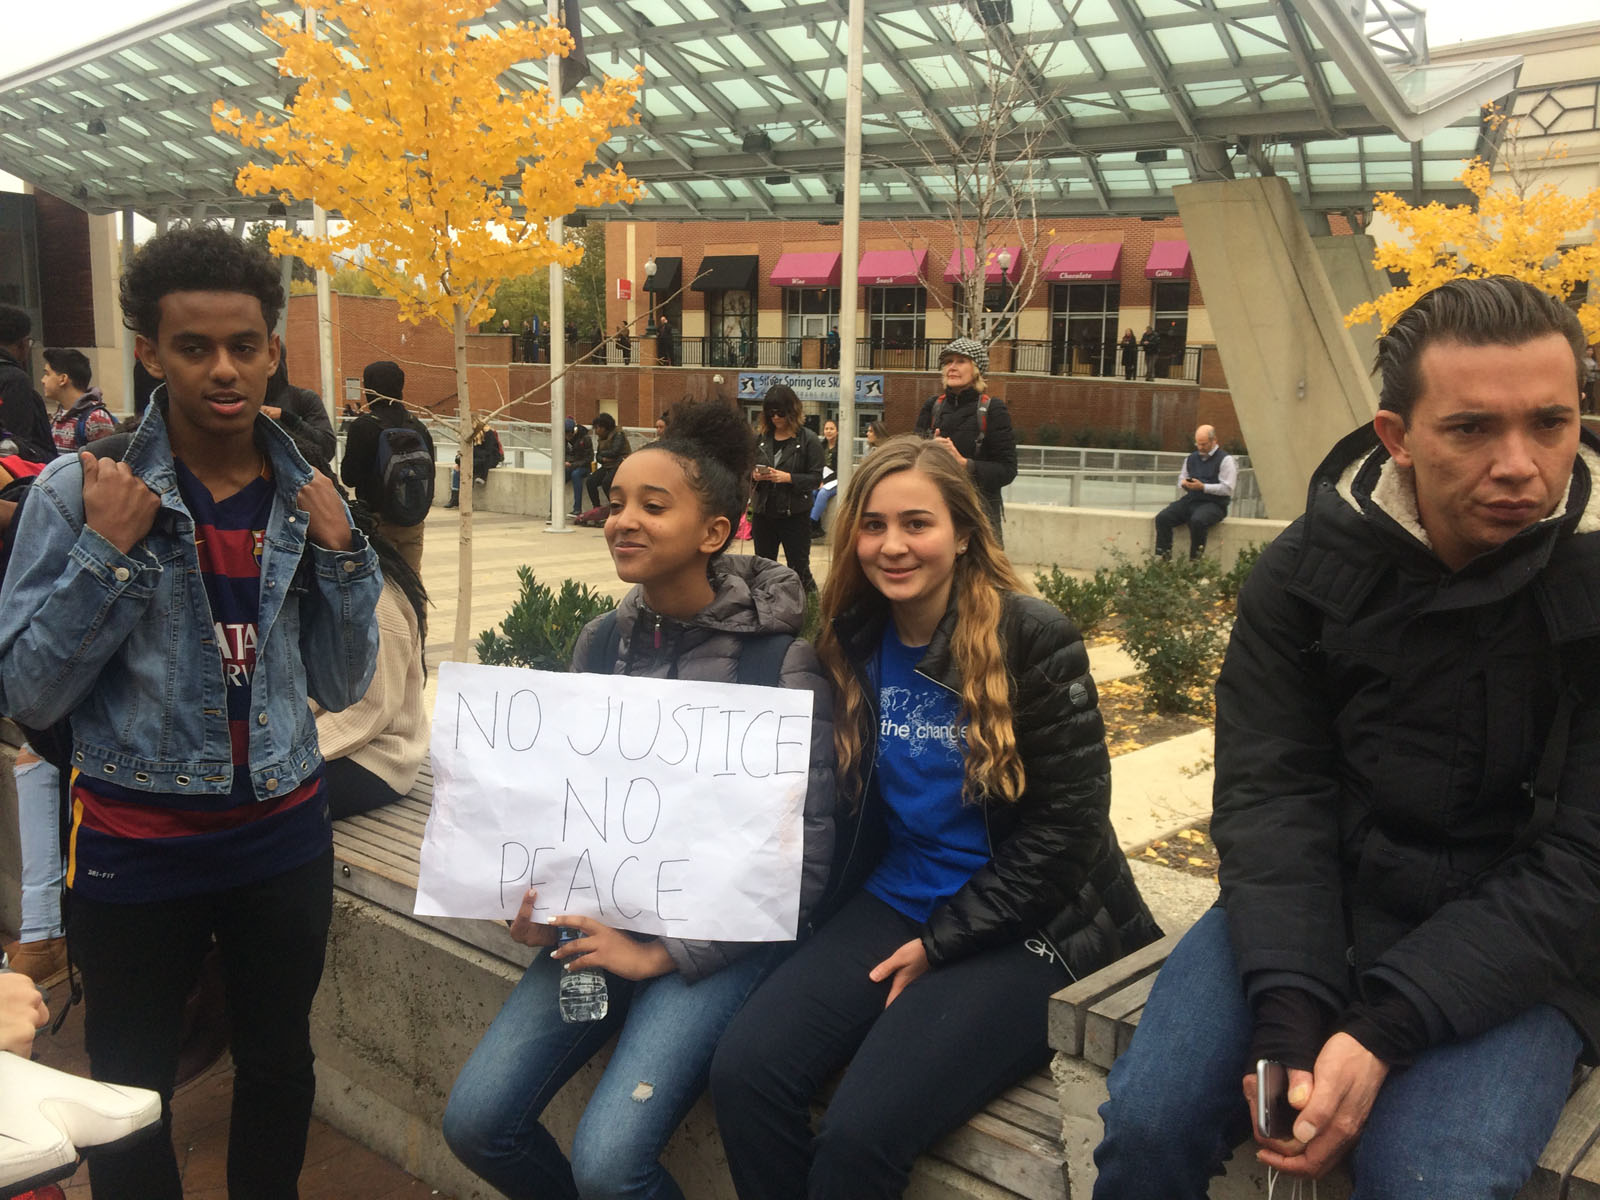 Montgomery County high school students who left class to protest President-elect Donald Trump end their march in downtown Silver Spring, Md. on Nov. 14, 2016. (WTOP/Dick Uliano)